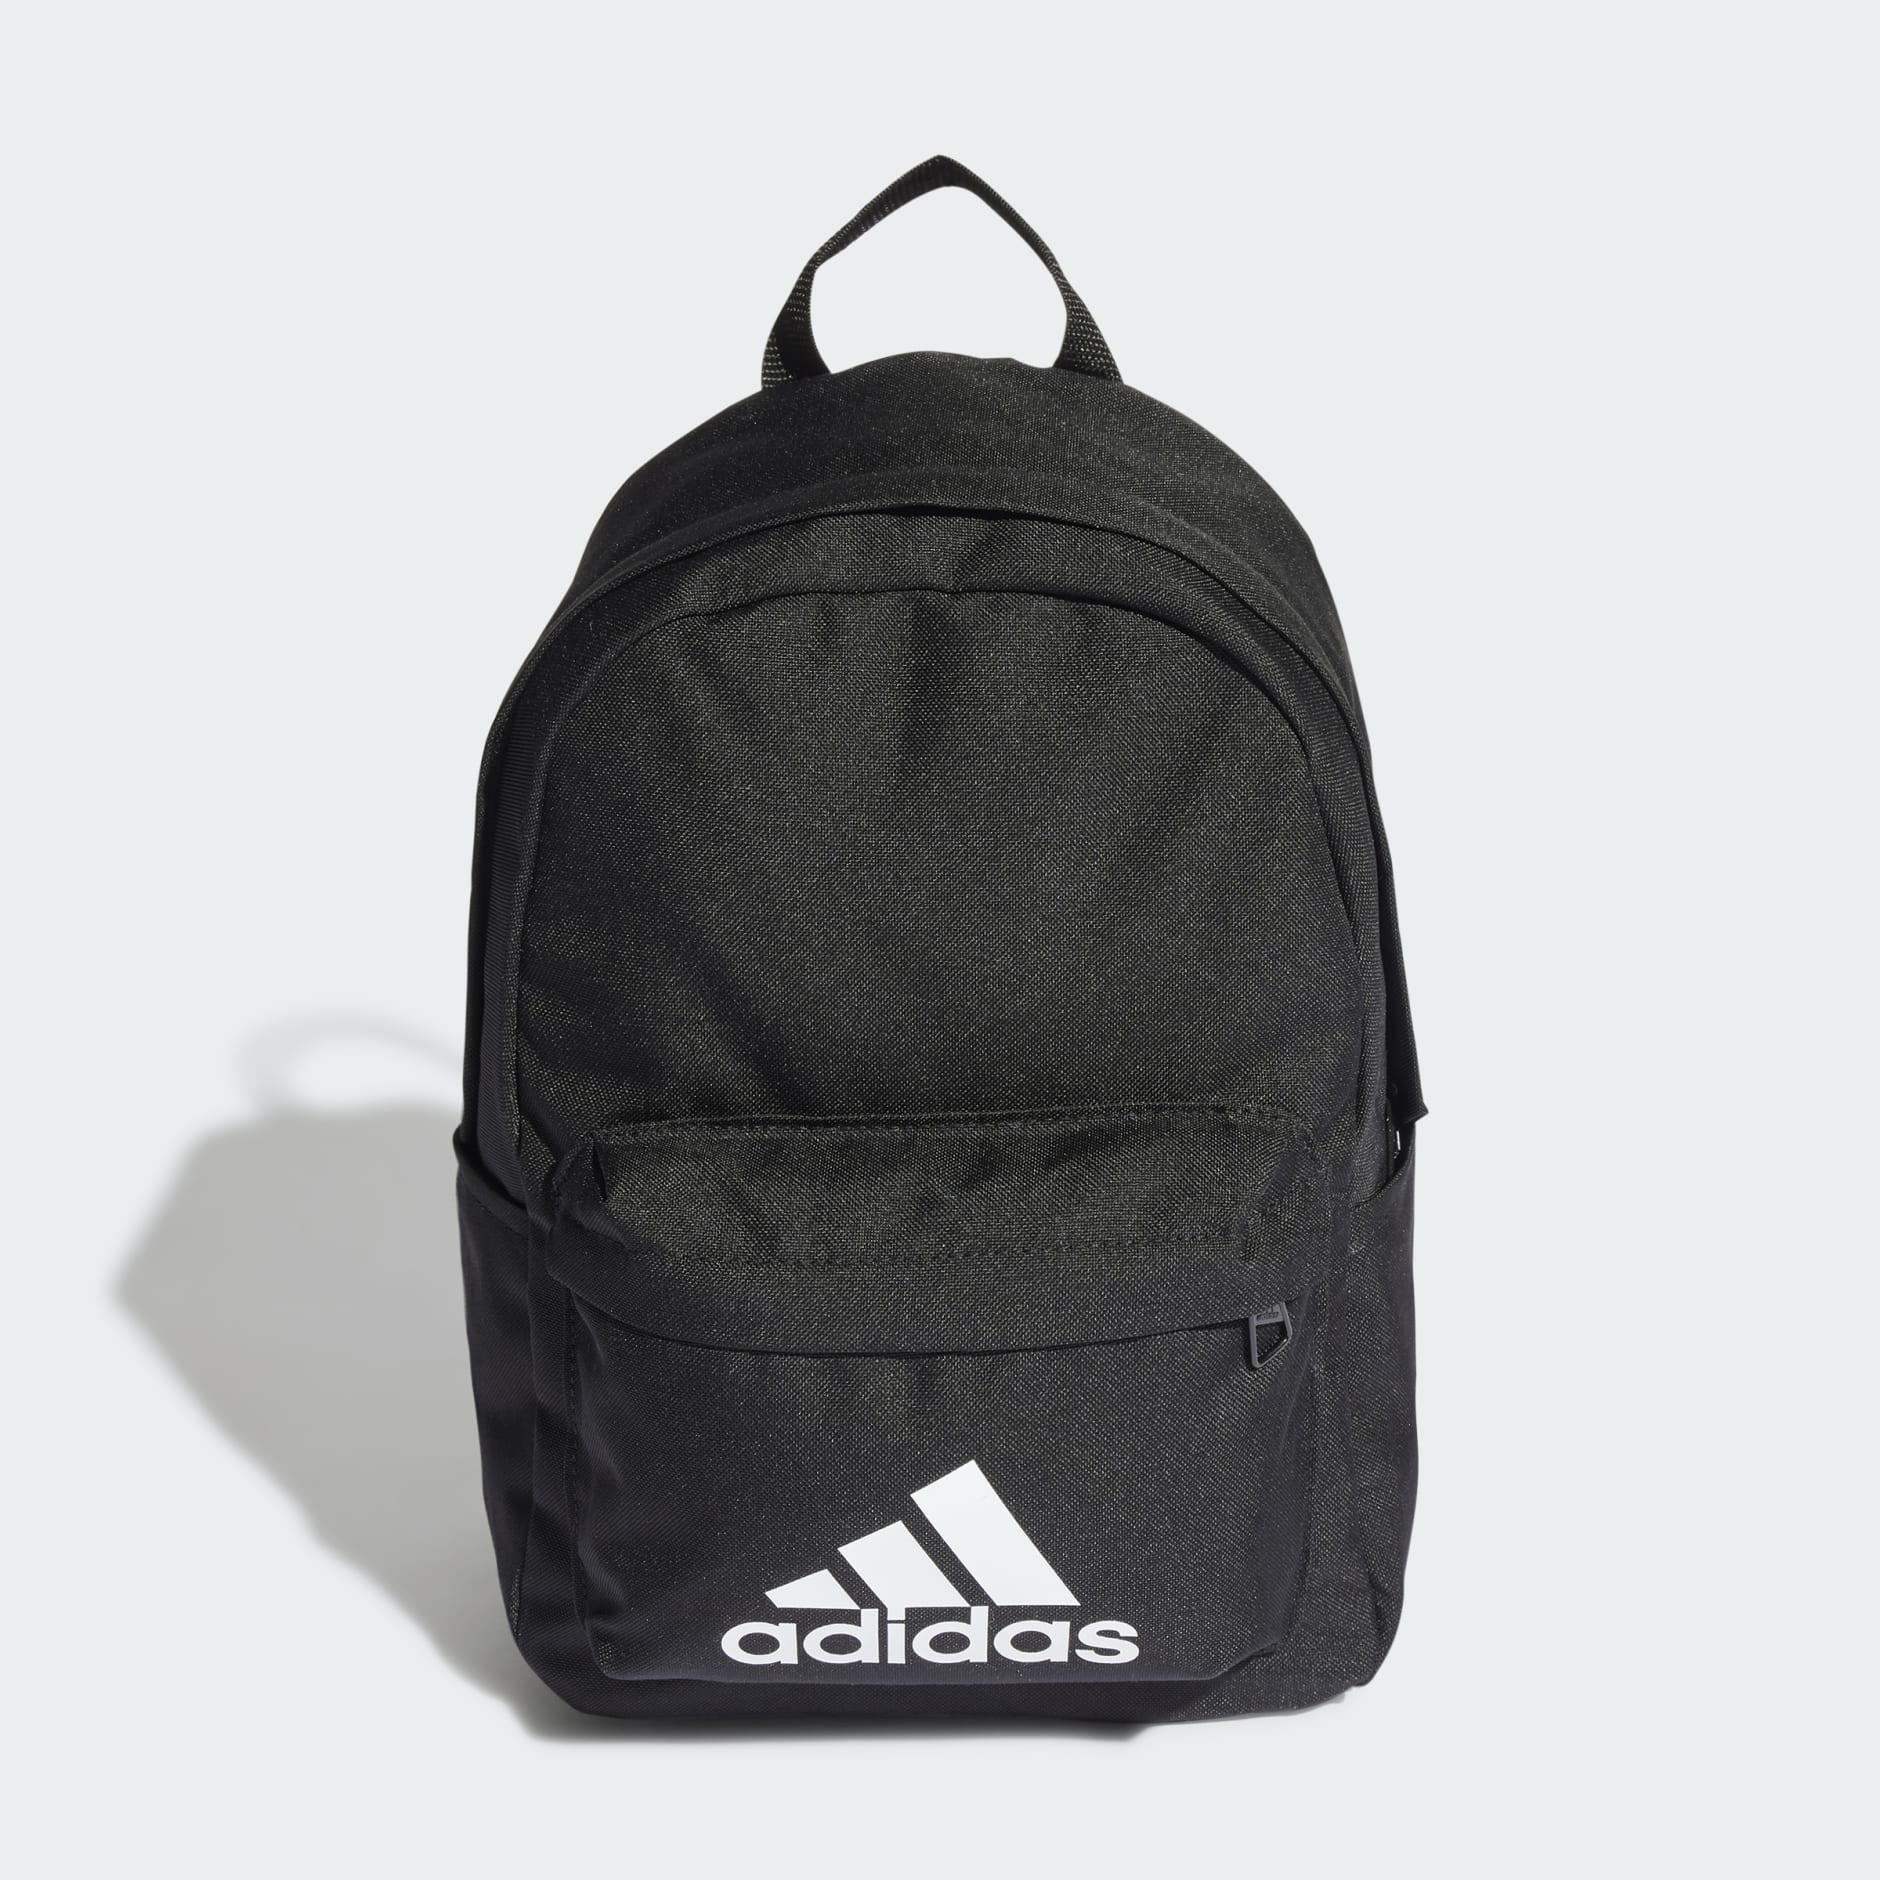 Accessories - Backpack - Black | adidas South Africa